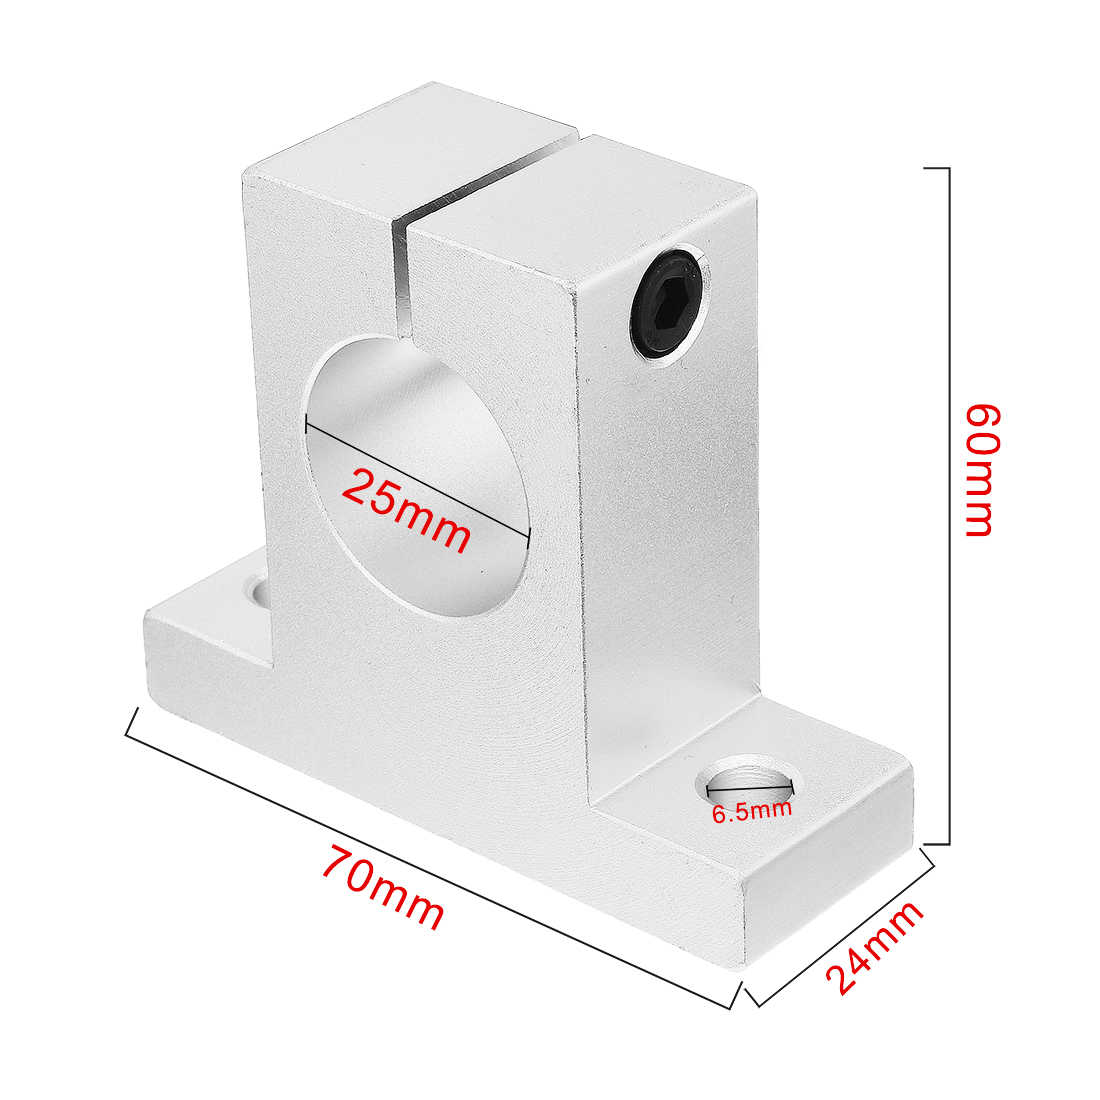 2pcs SK25 Aluminum Linear Motion Rail Clamping Guide Support for 25mm Dia Shaft